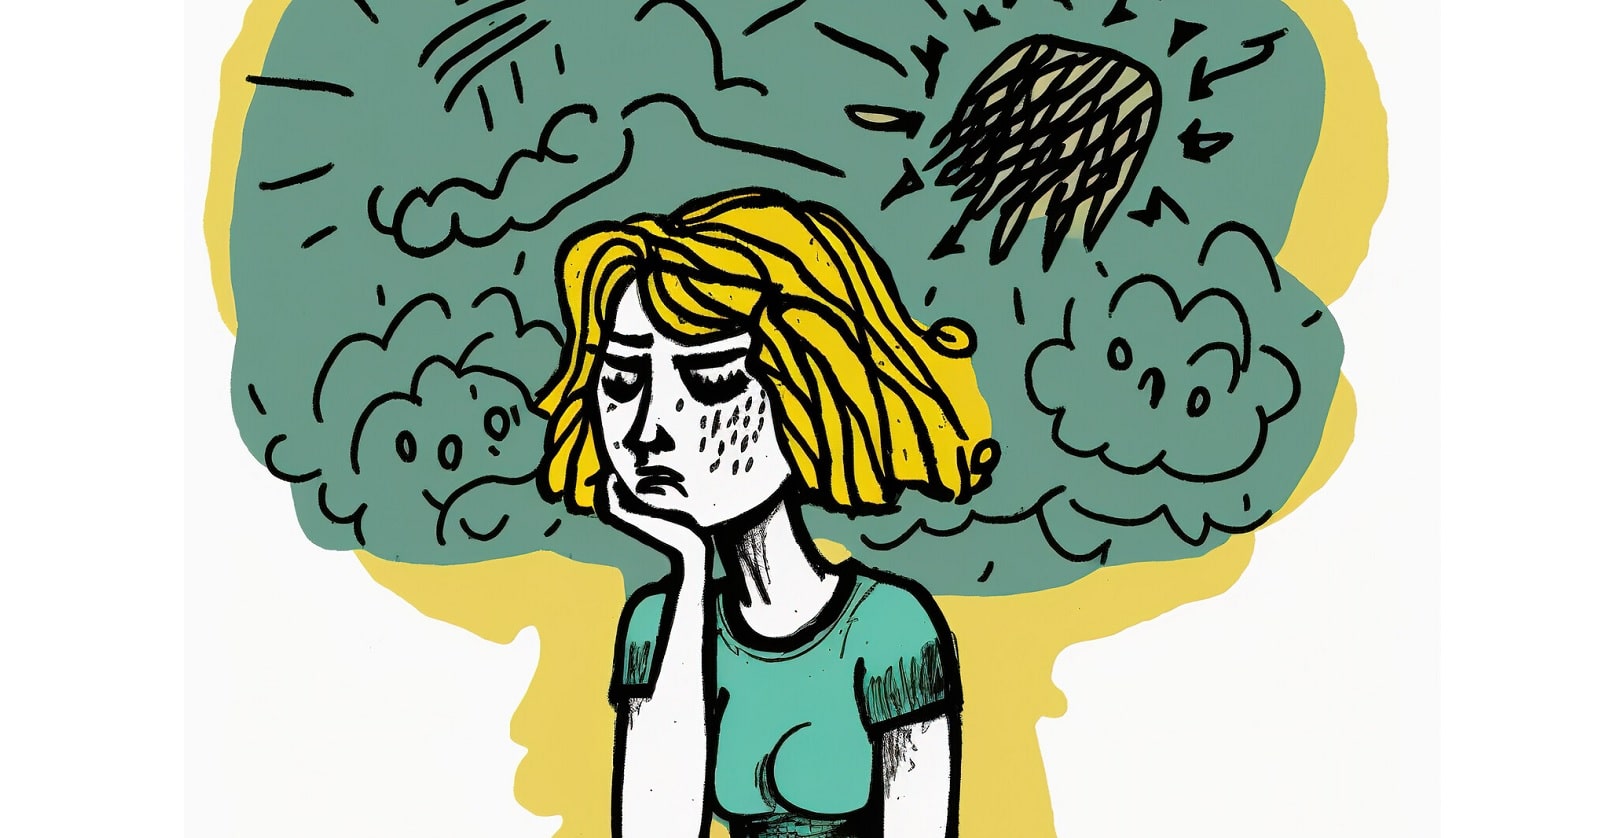 illustration of woman with thoughts above her head that appear negative